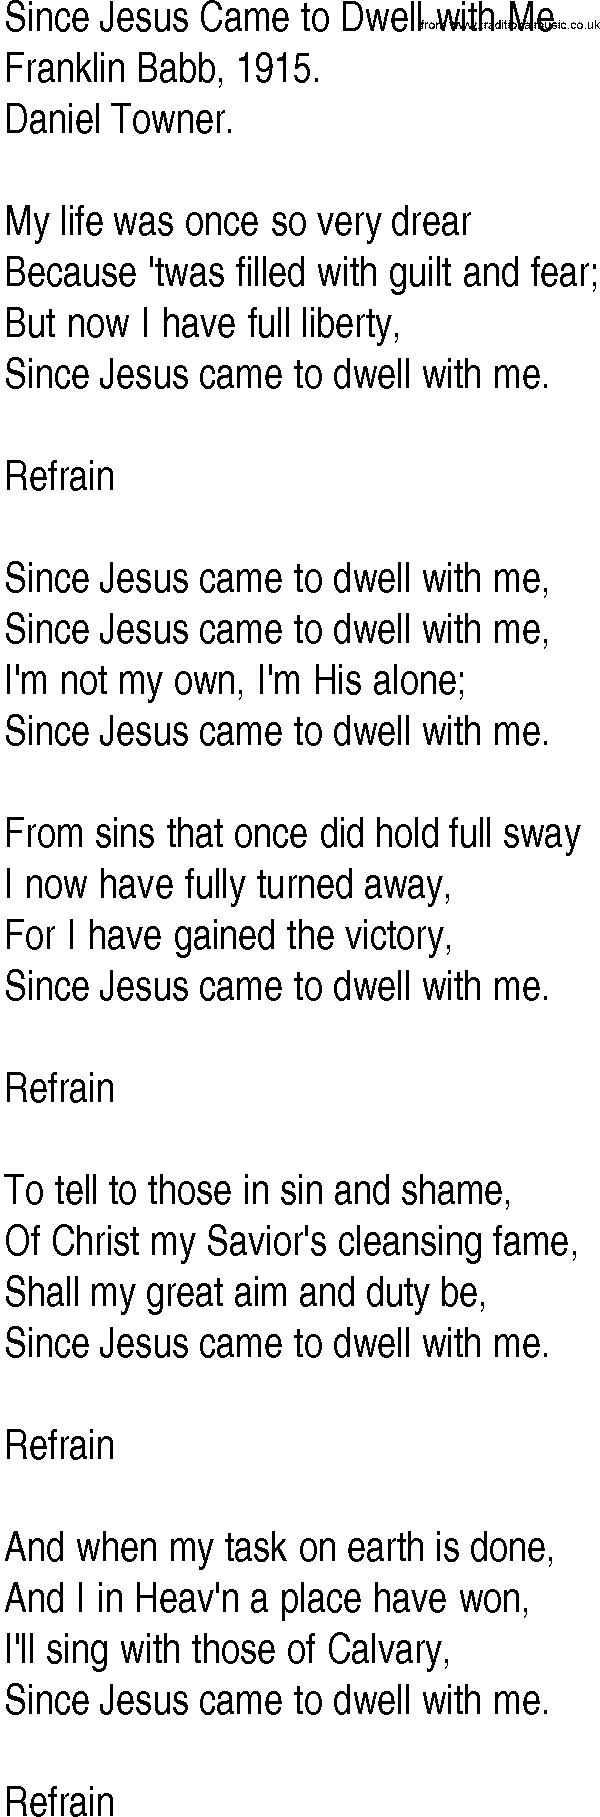 Hymn and Gospel Song: Since Jesus Came to Dwell with Me by Franklin Babb lyrics